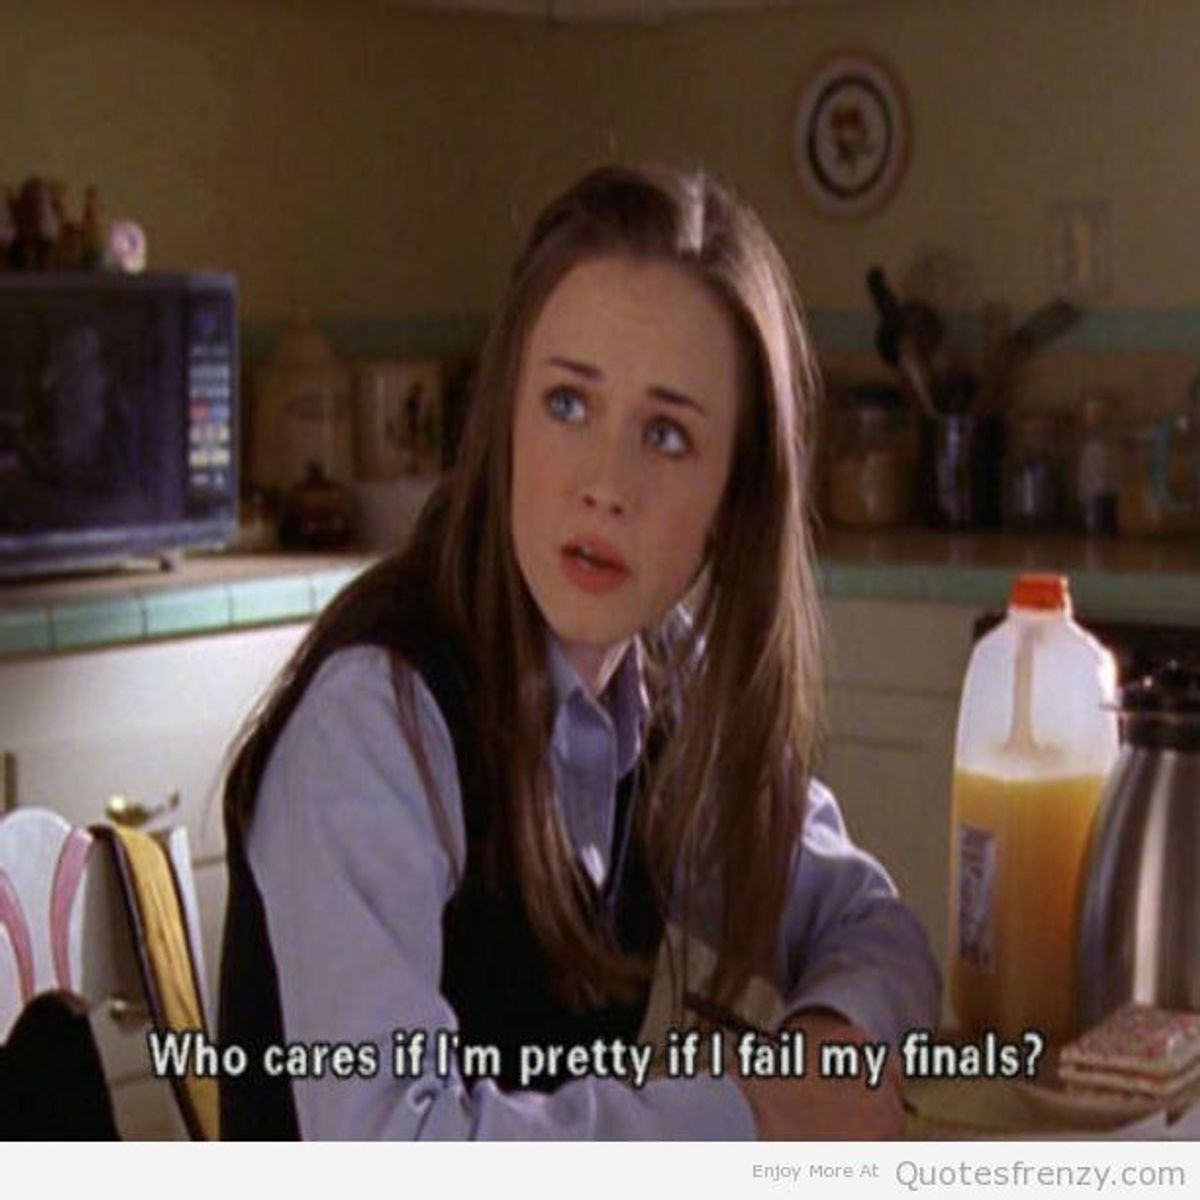 Finals Week: As Told by Gilmore Girls